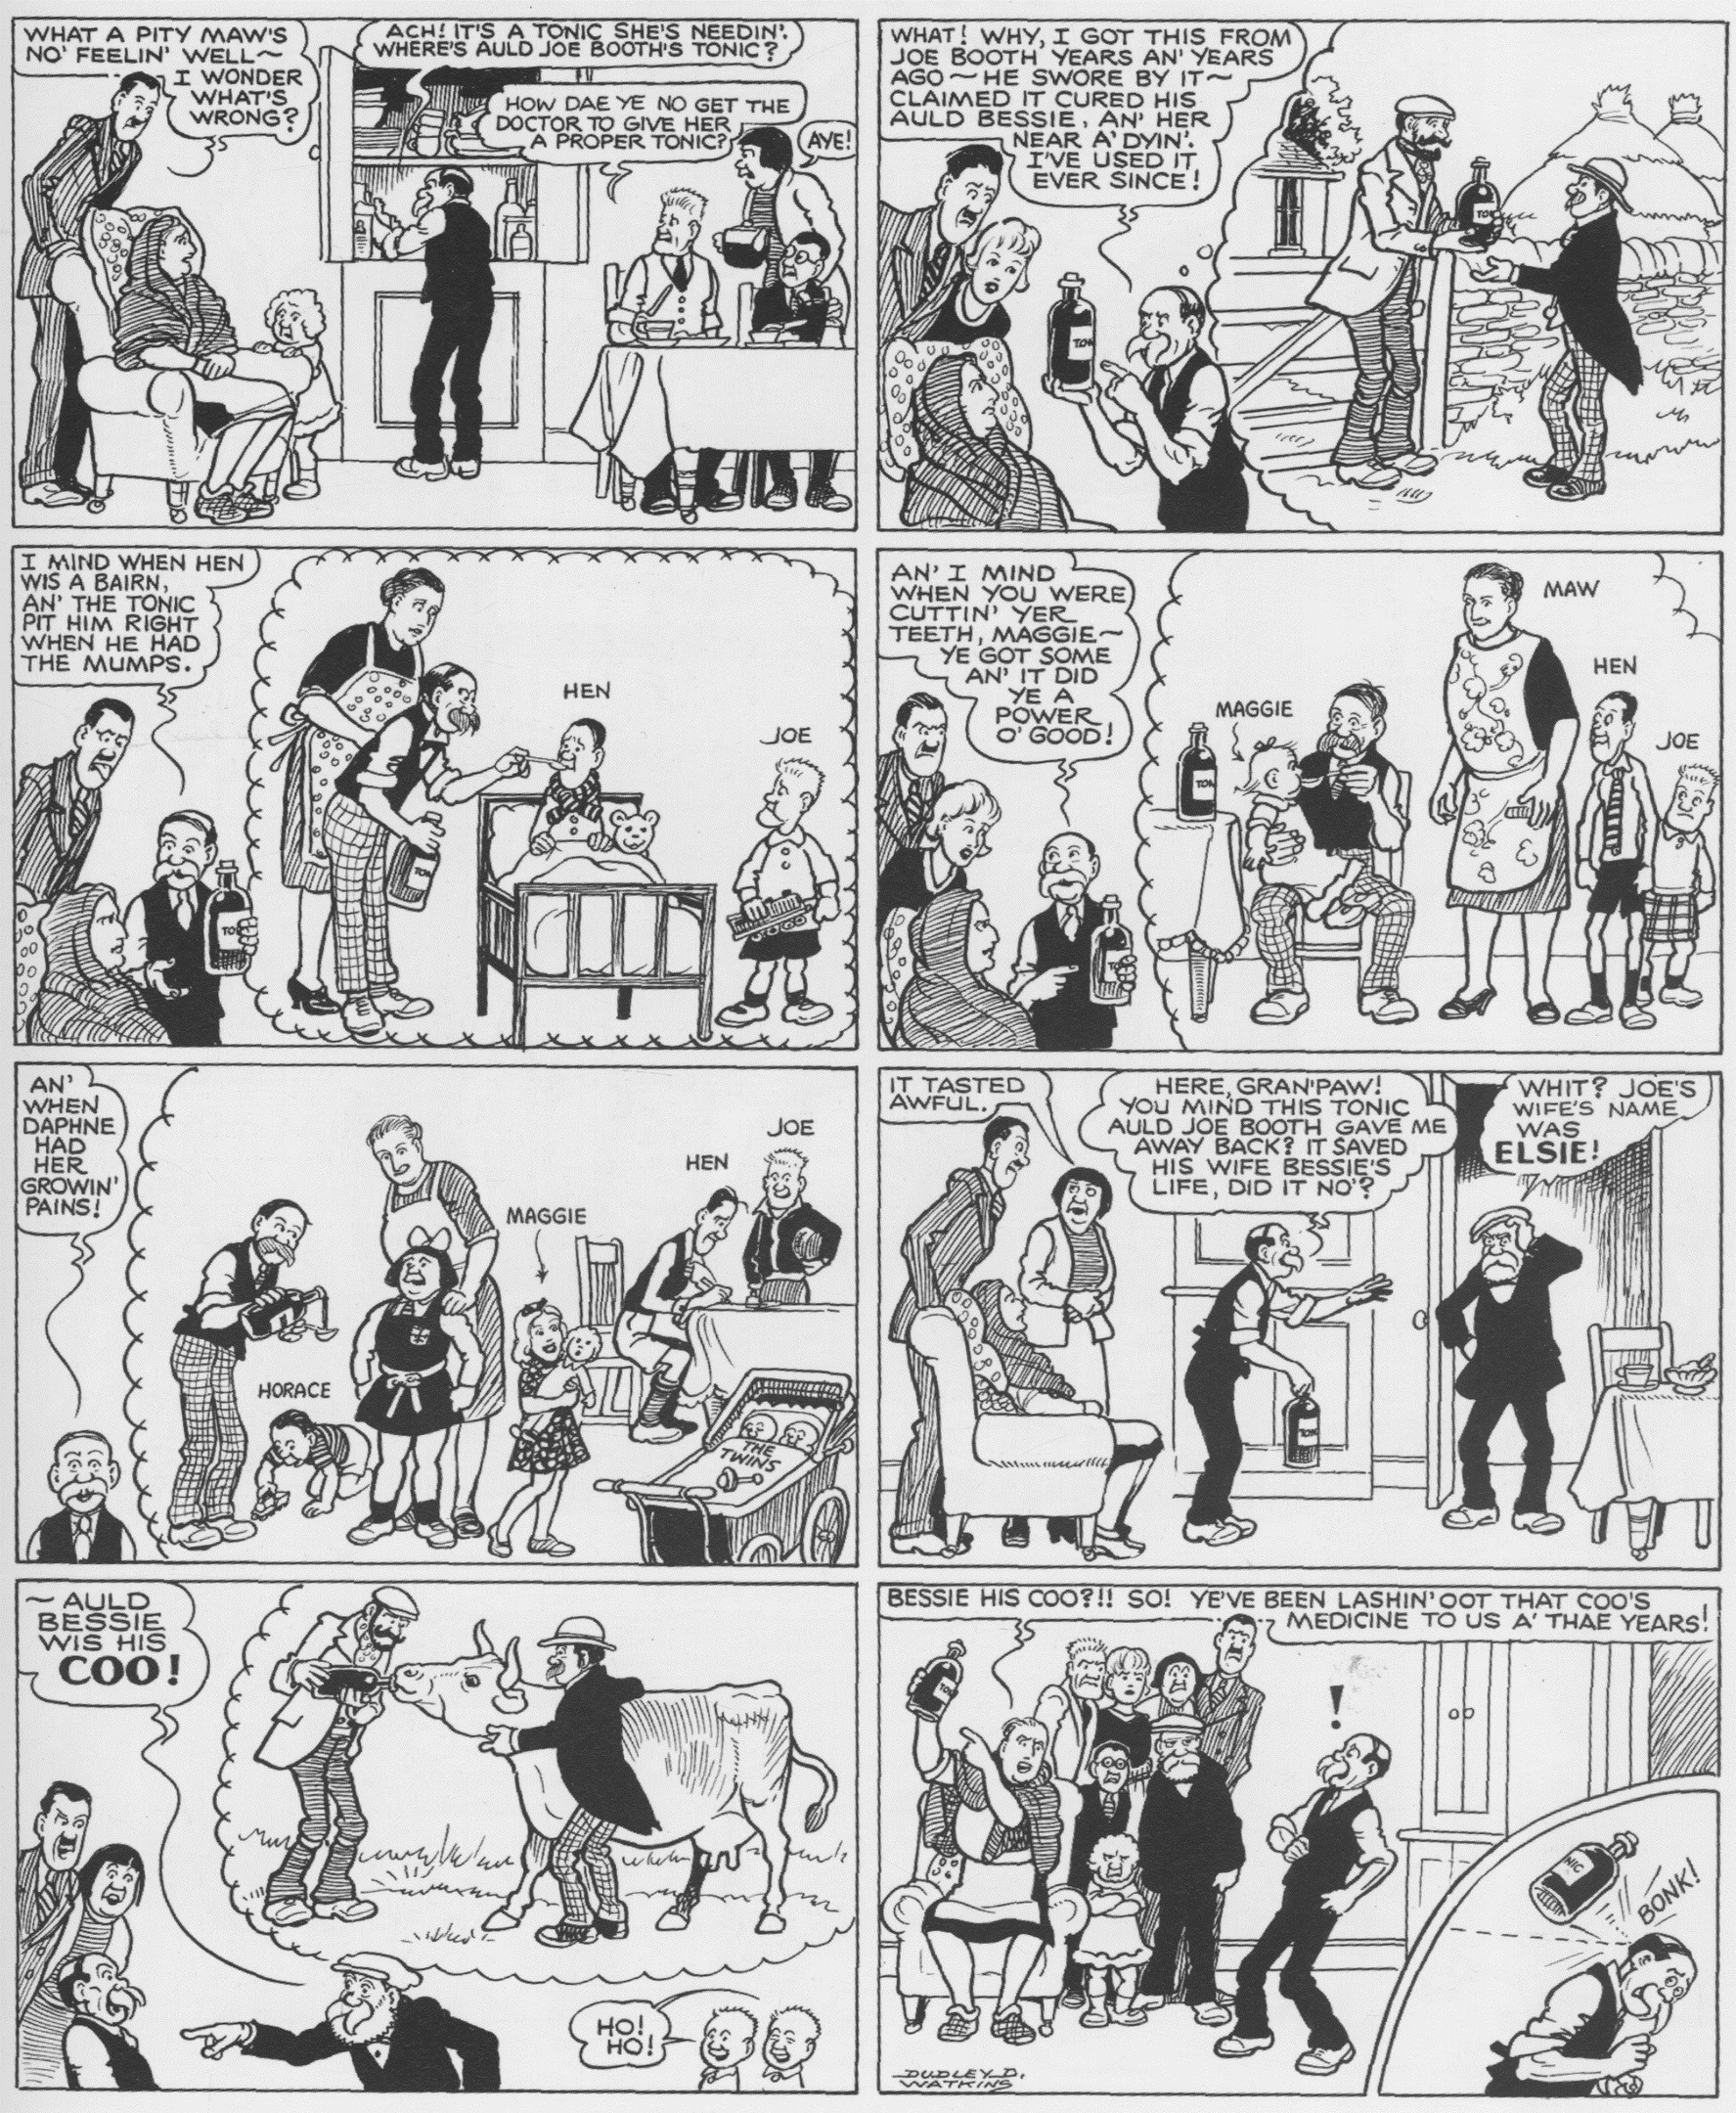 Broons-1954-growing-up